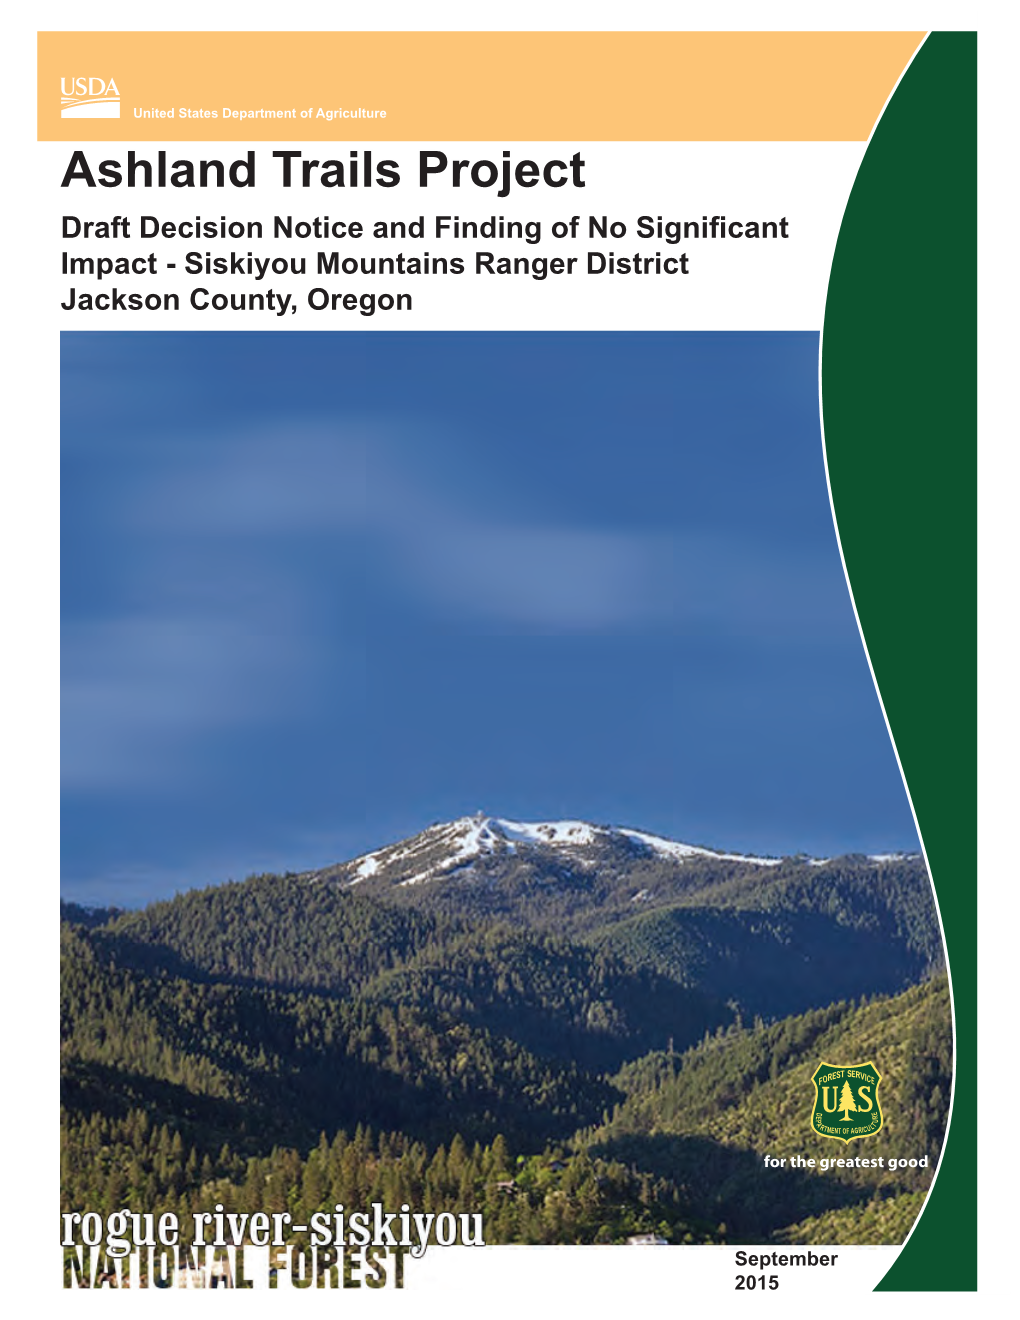 Ashland Trails Project Draft Decision Notice and Finding of No Signiﬁ Cant Impact - Siskiyou Mountains Ranger District Jackson County, Oregon